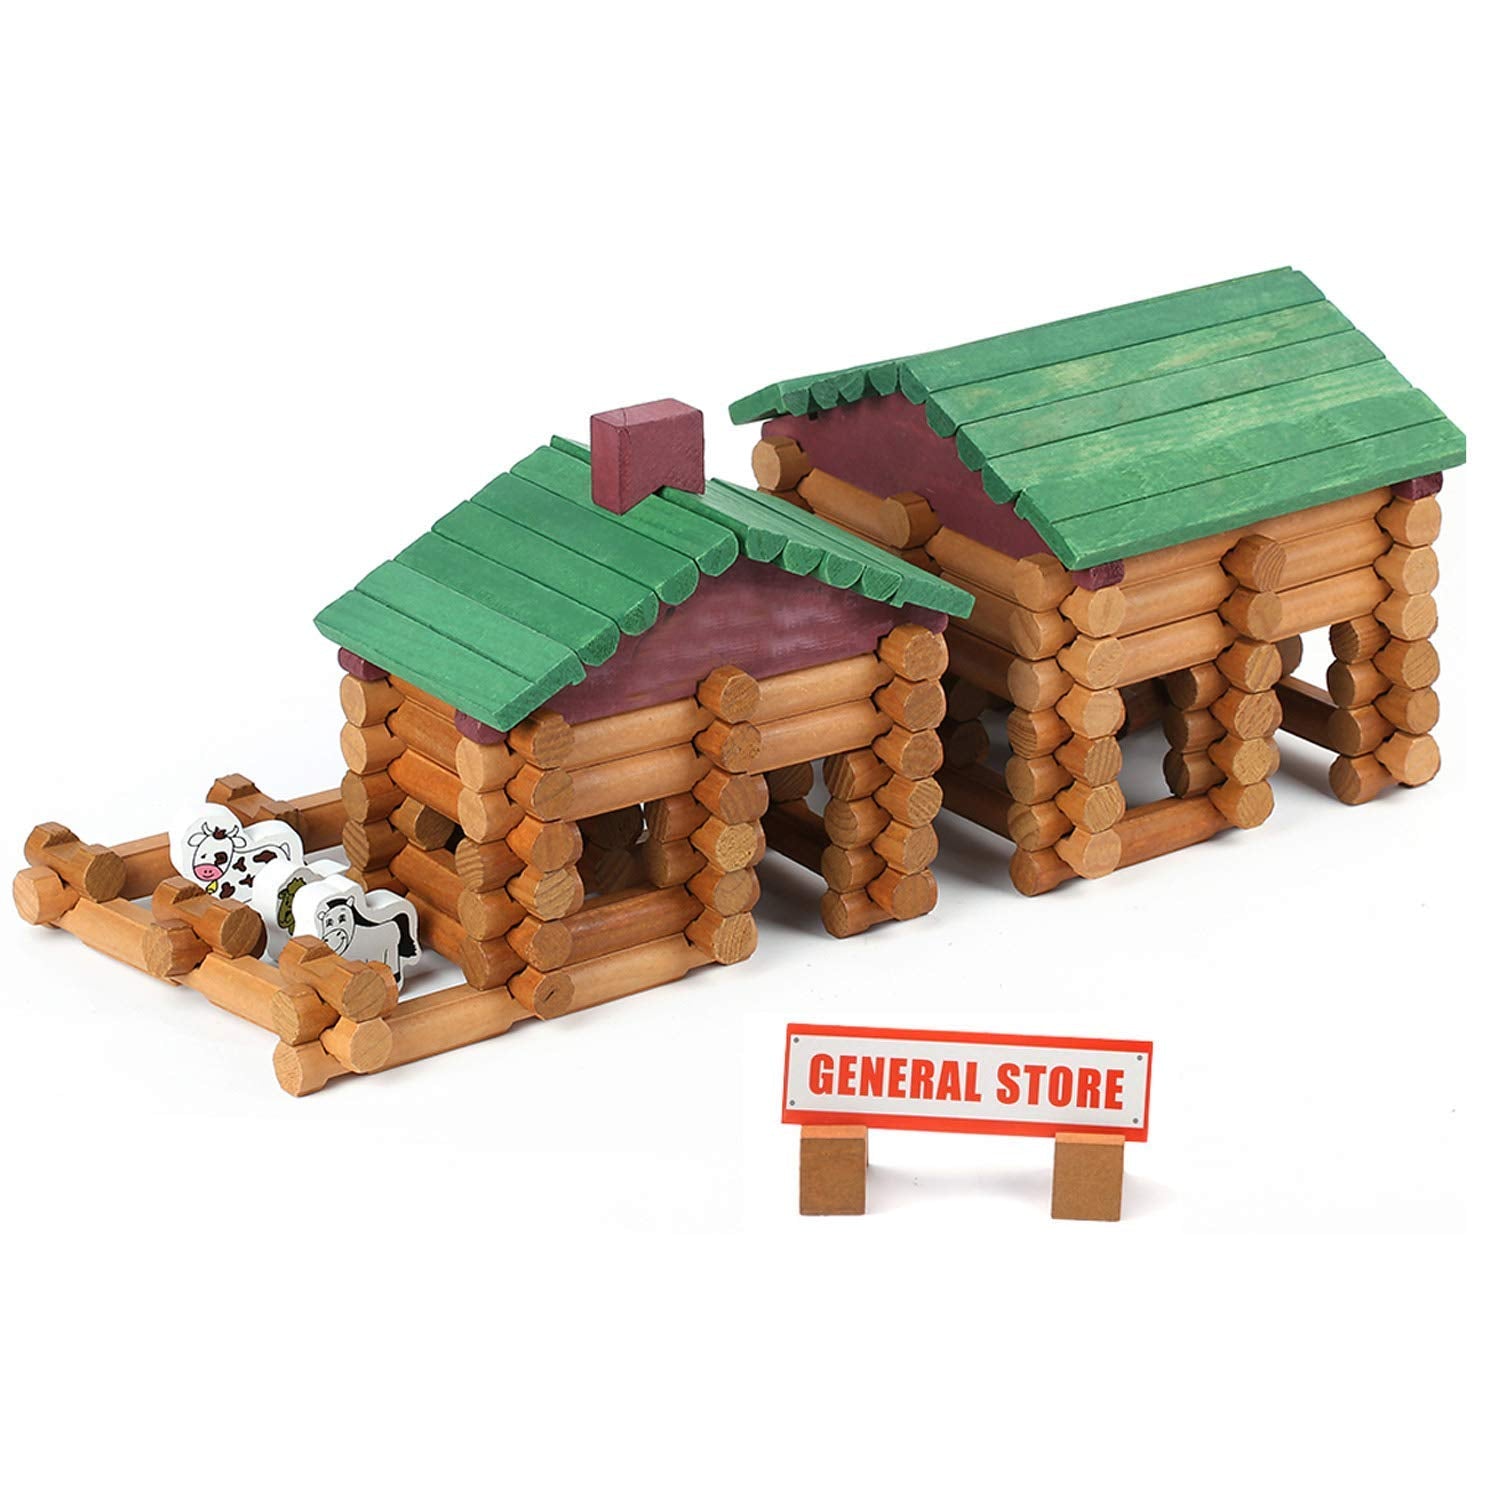 Wondertoys 170 Pieces Wood Logs Set Ages 3+, Classic Building Log Toys for Boy, Creative Construction Engineering Educational Gifts